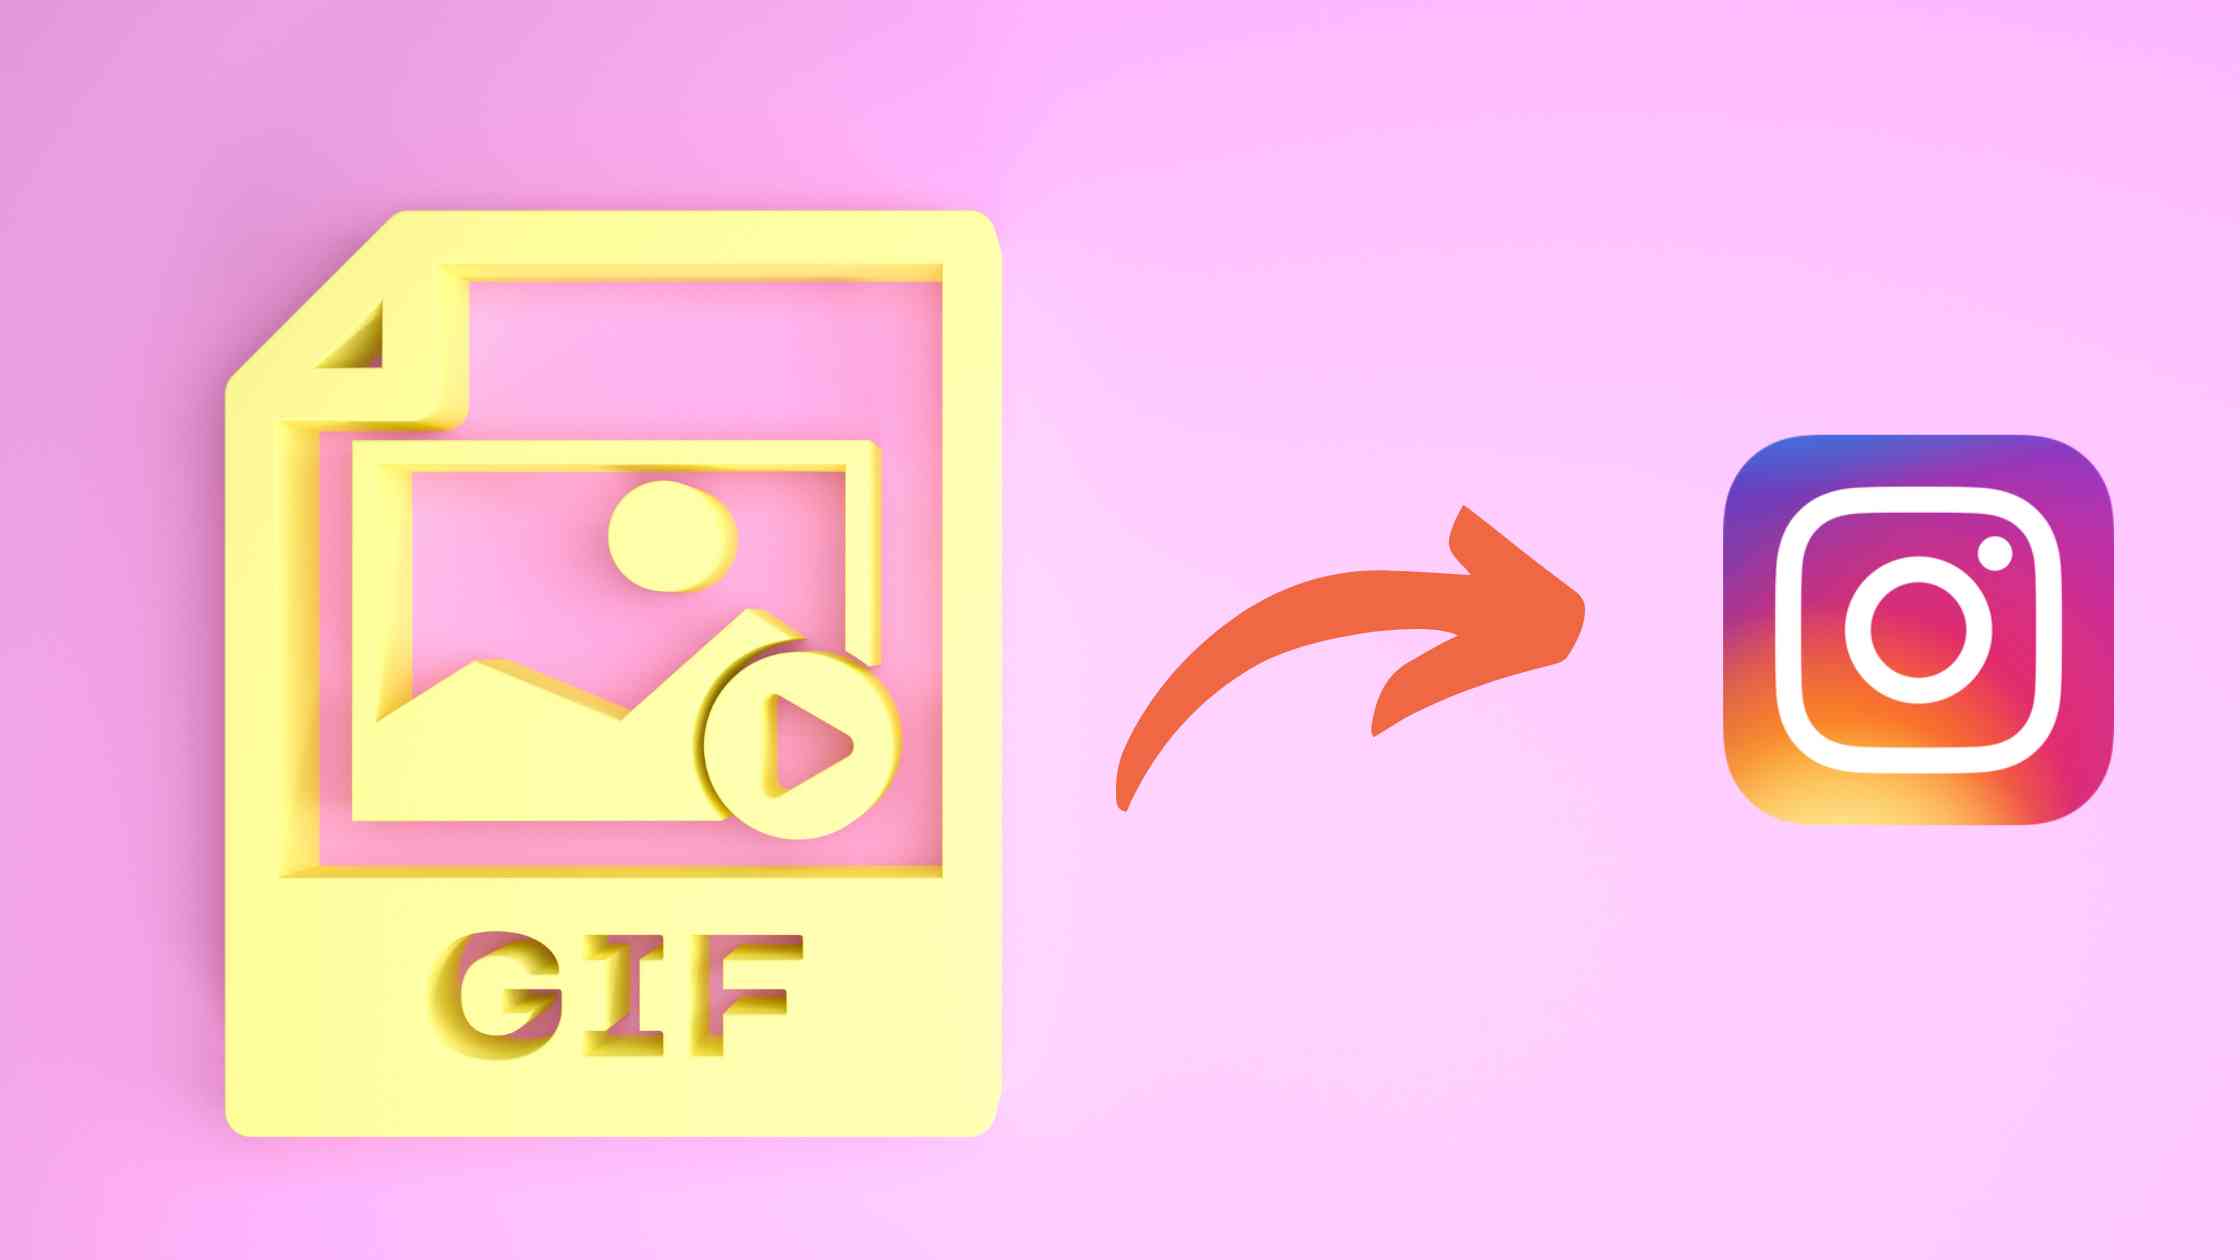 How to upload GIF to Instagram easily